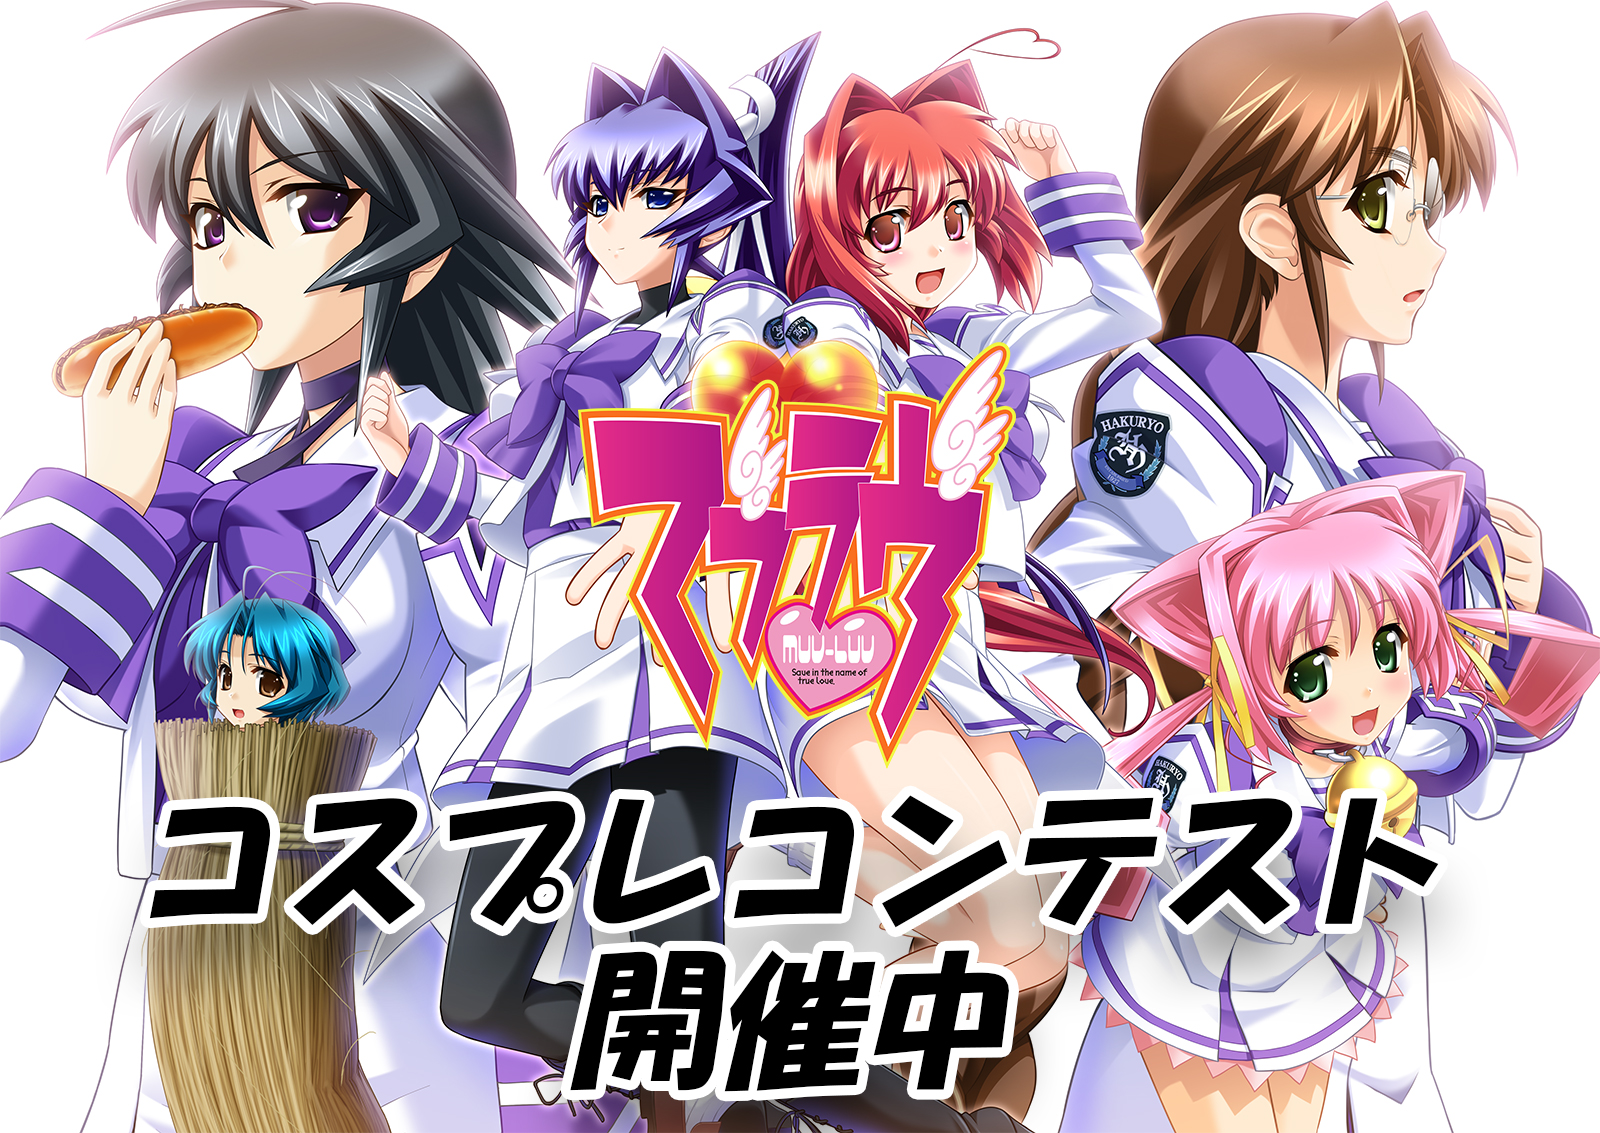 Total Prize of 1,000,000 JPY- “MUV-LUV” COSPLAY CONTEST Starts!